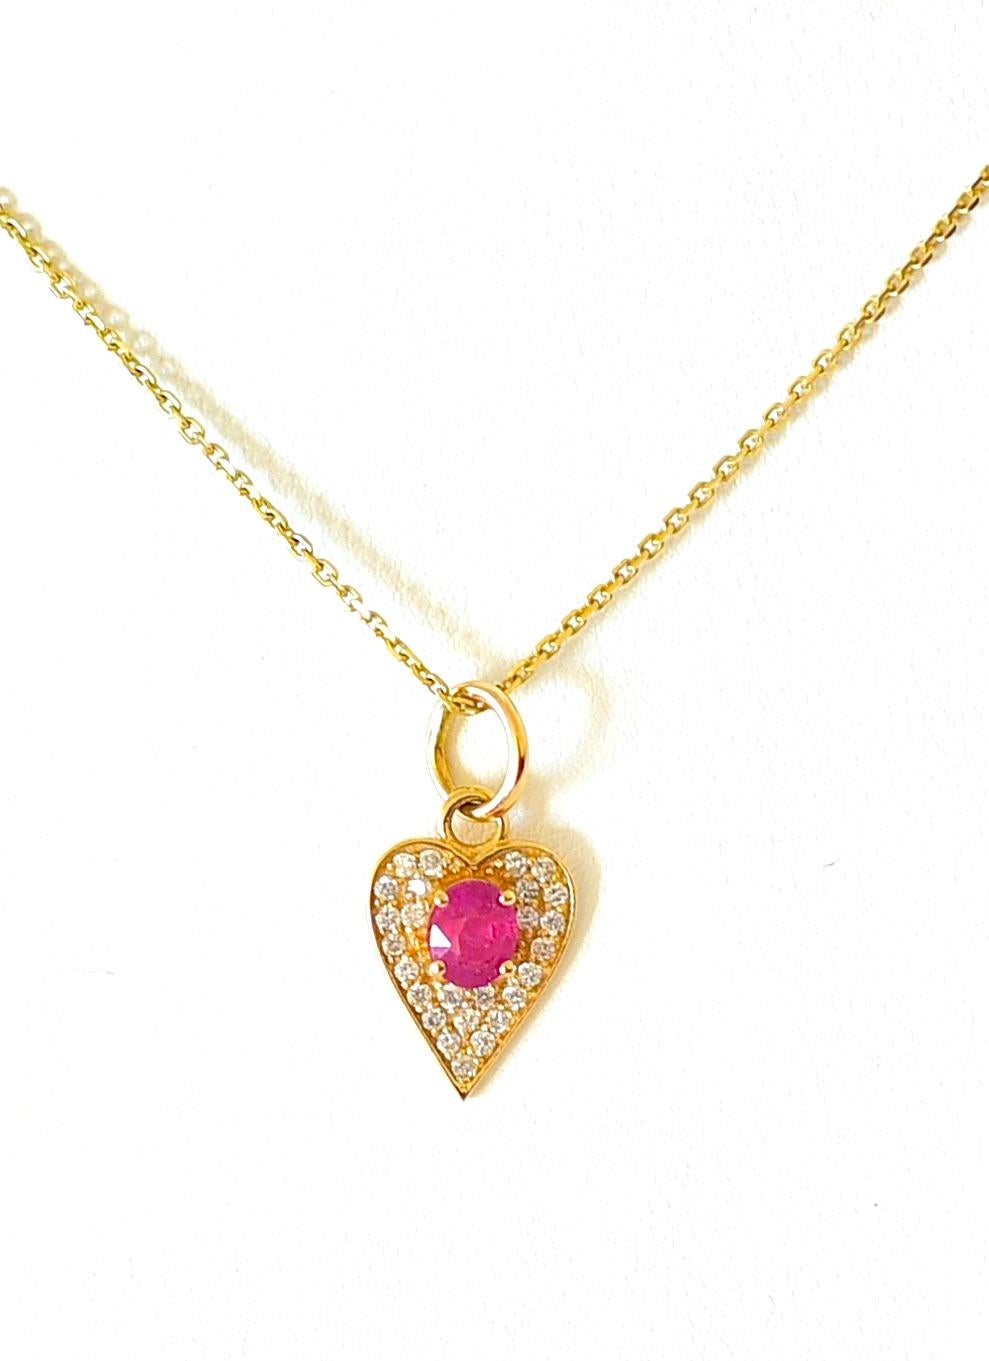 Modern 14K Solid Yellow Gold, Ruby and Diamond Accents Necklace.